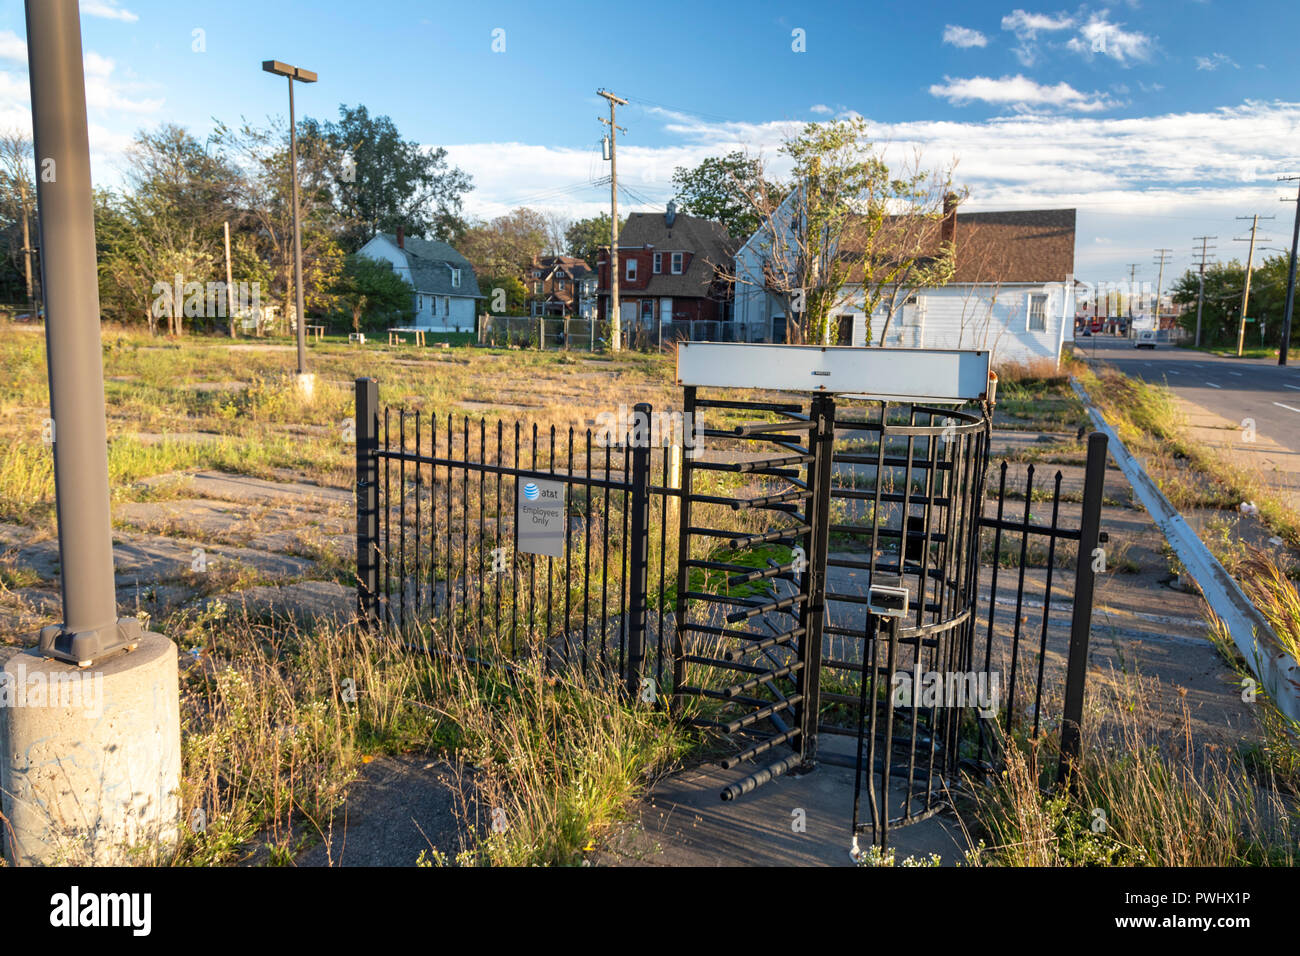 Detroit, Michigan - A turnstile is all that remains on an abandoned AT&T employee parking lot. Stock Photo